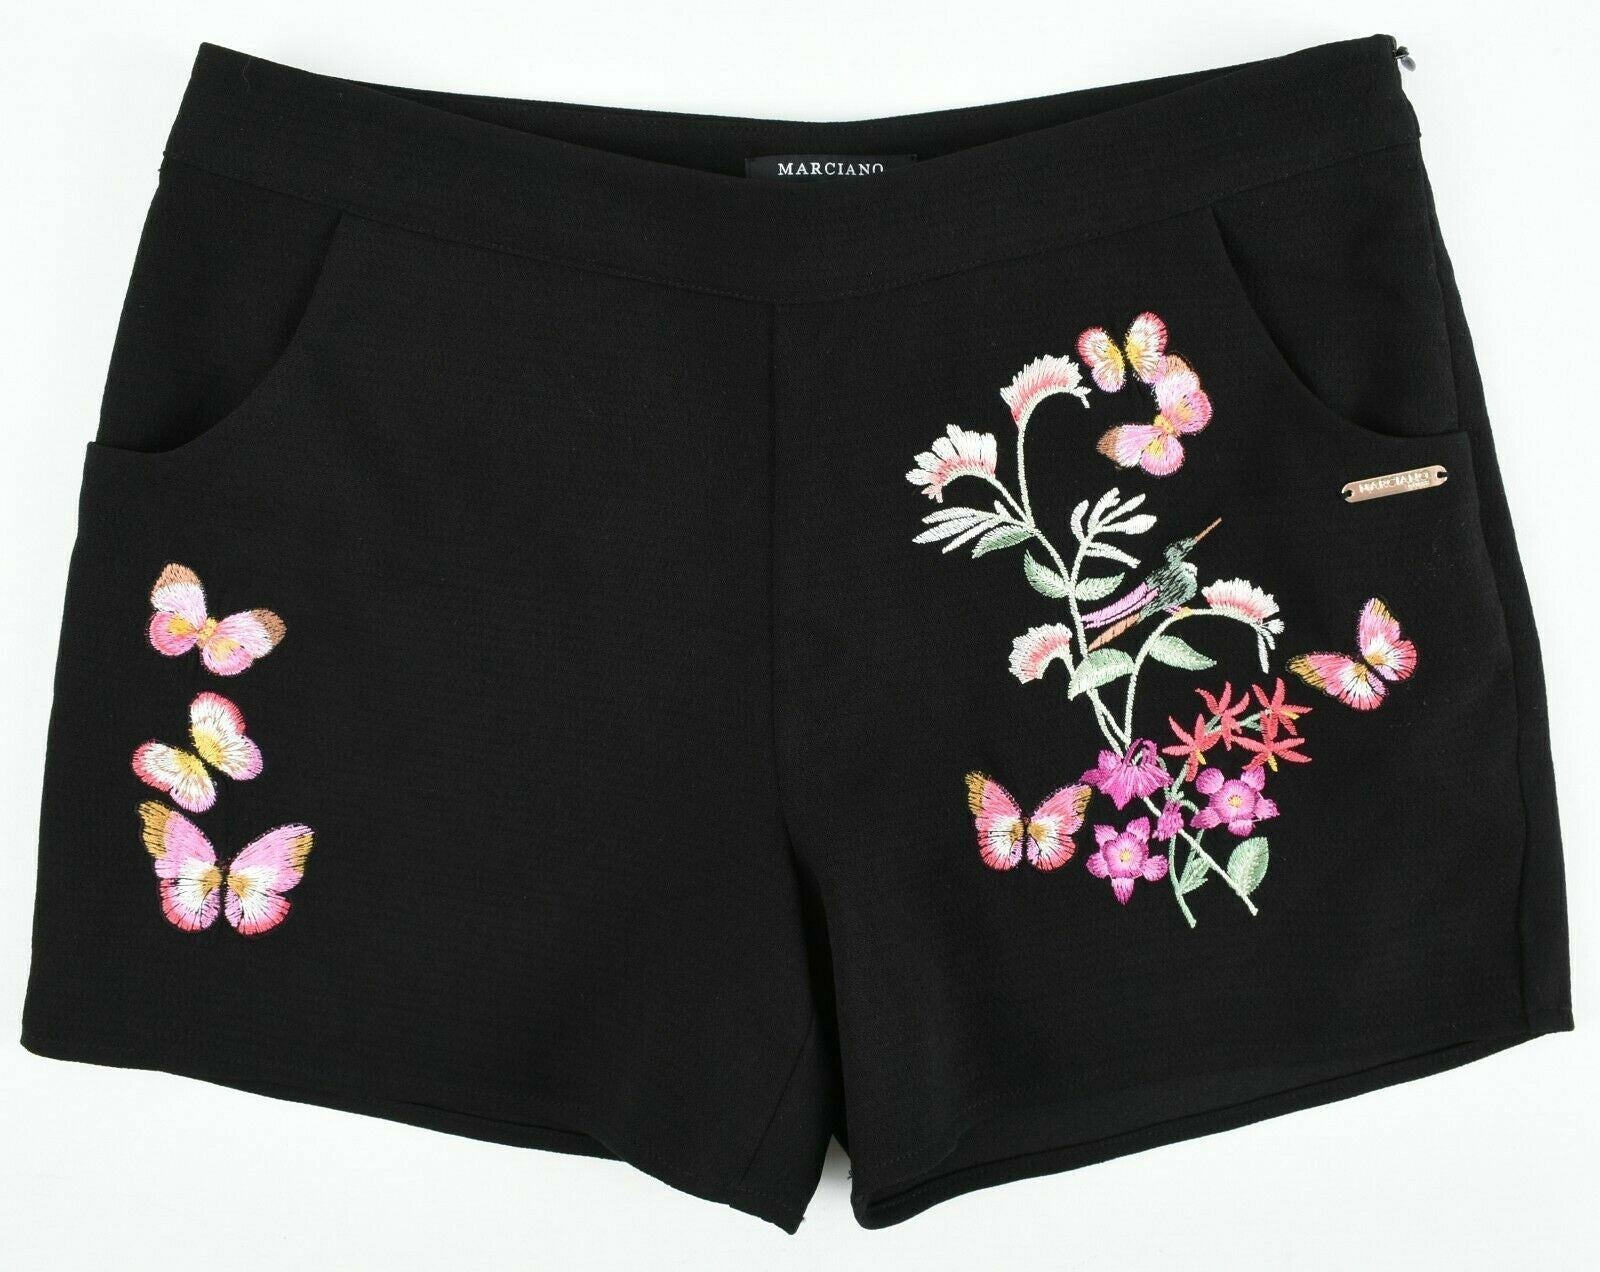 MARCIANO LOS ANGELES Girls' Black Embroidered Shorts, size 12 years